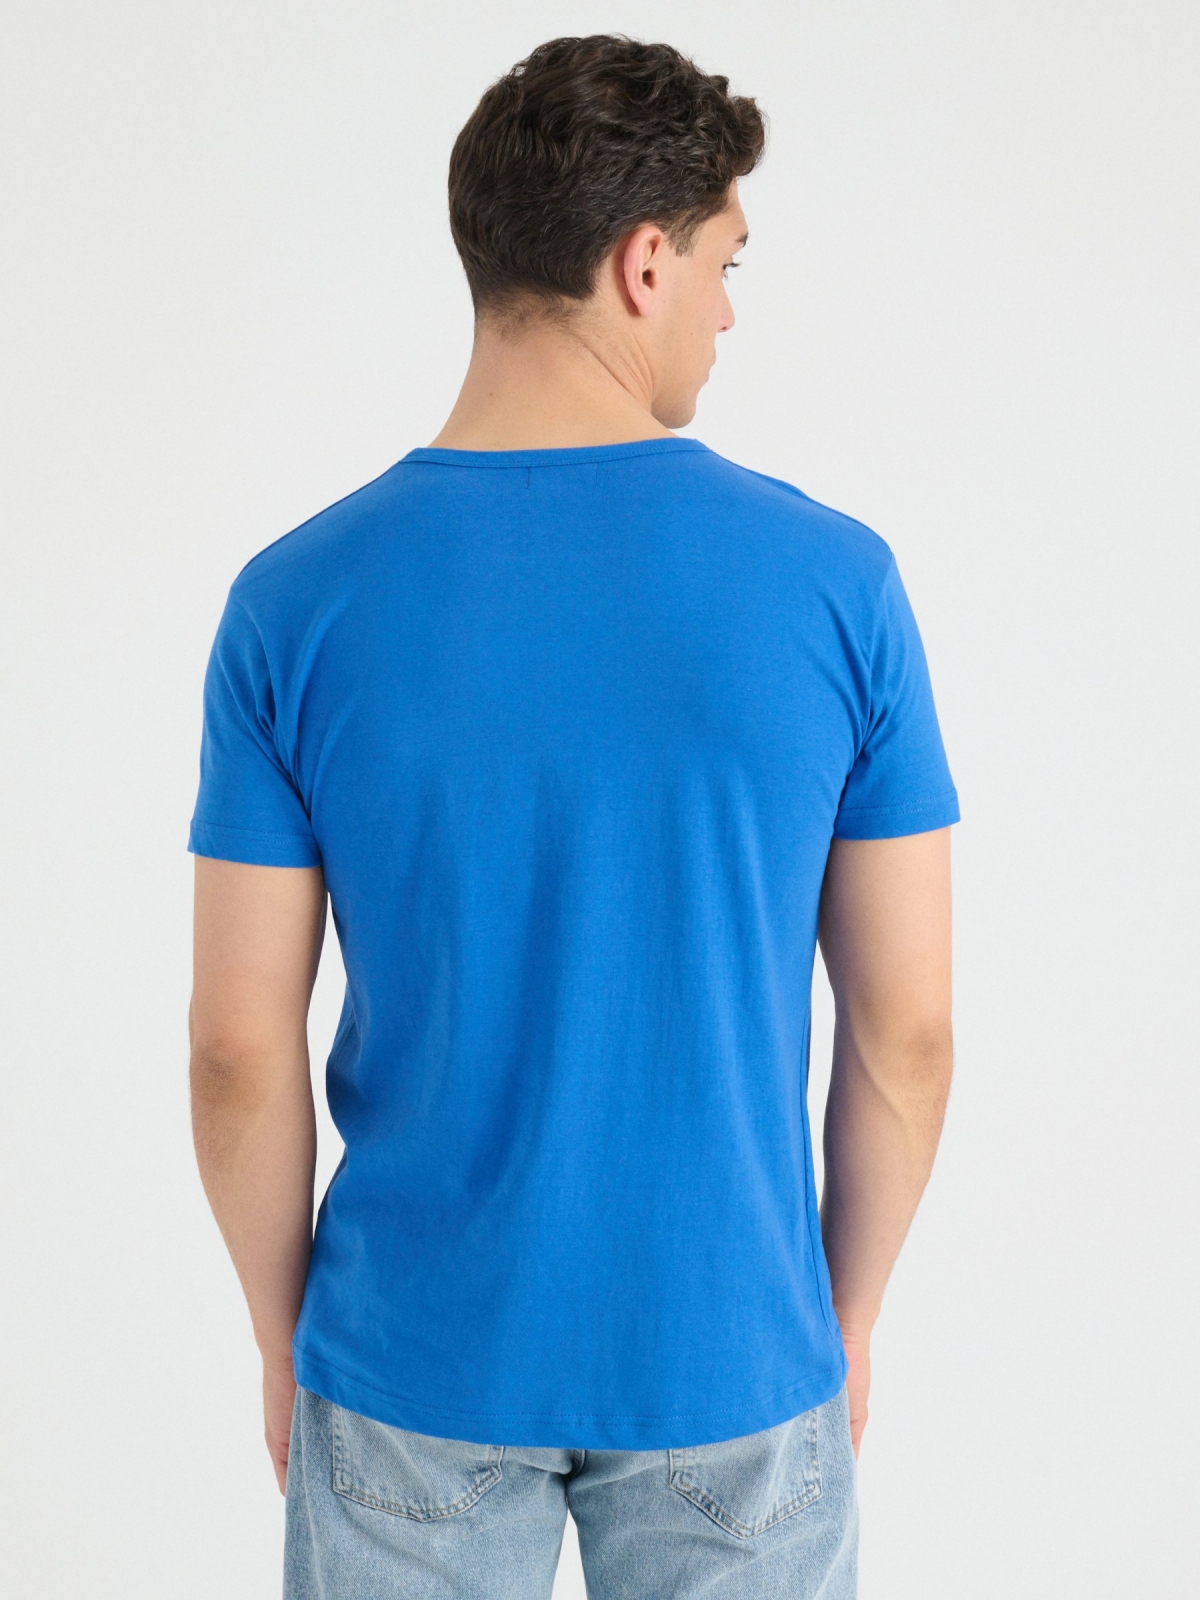 Buttons neck t-shirt blue middle back view